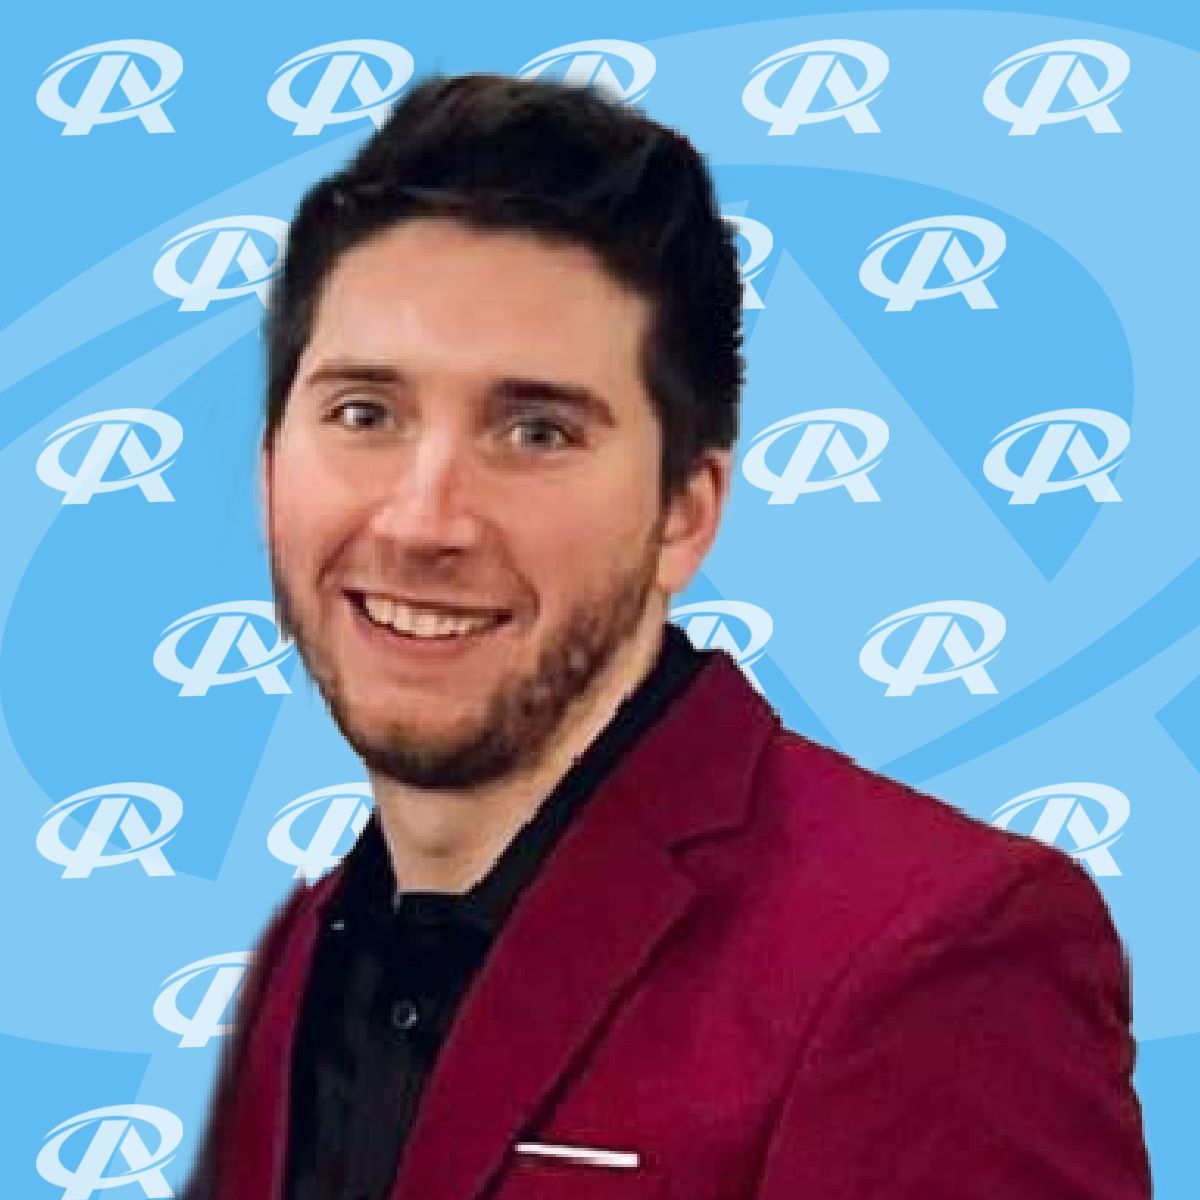 A man in a red suit is smiling in front of a blue background